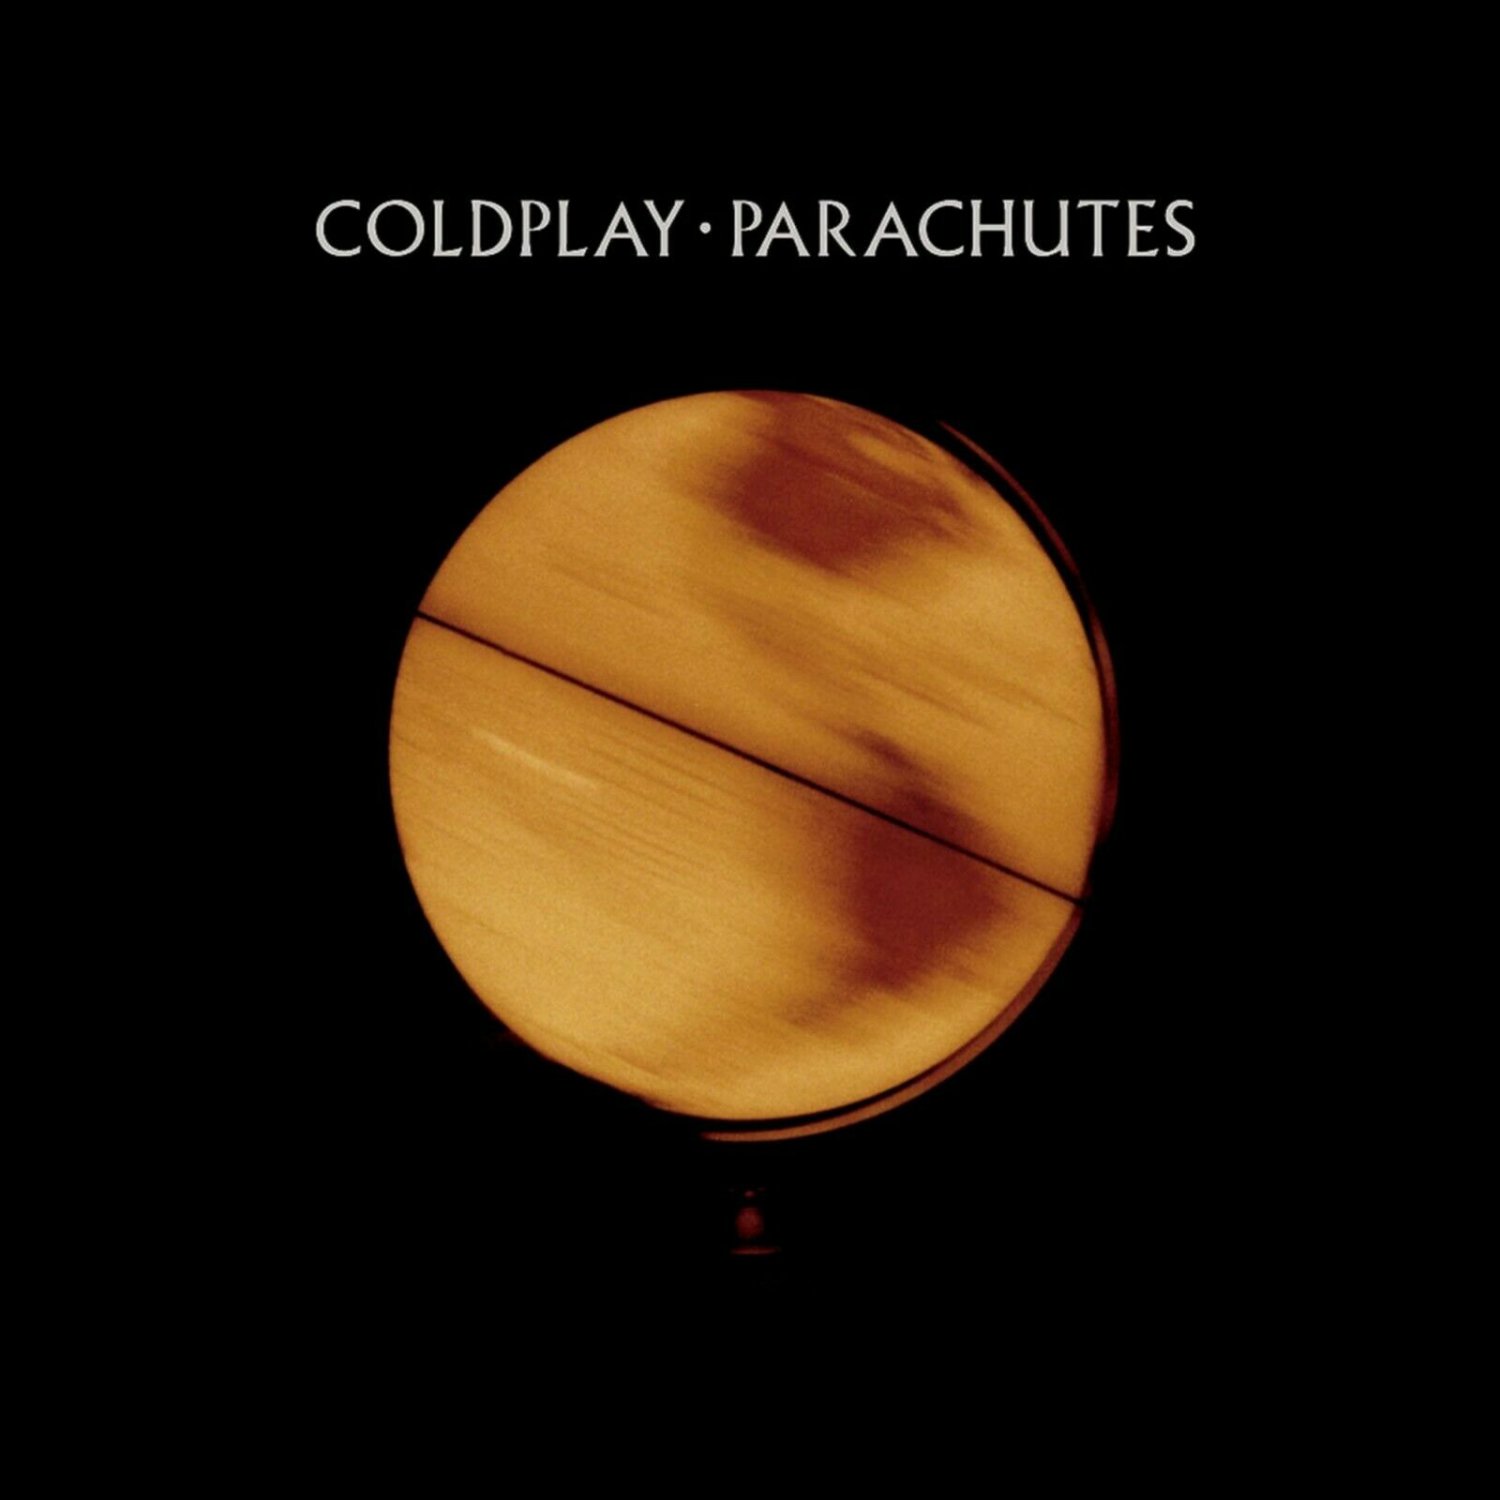 COLDPLAY Parachutes BANNER Huge 4X4 Ft Fabric Poster Tapestry Flag Print album cover art